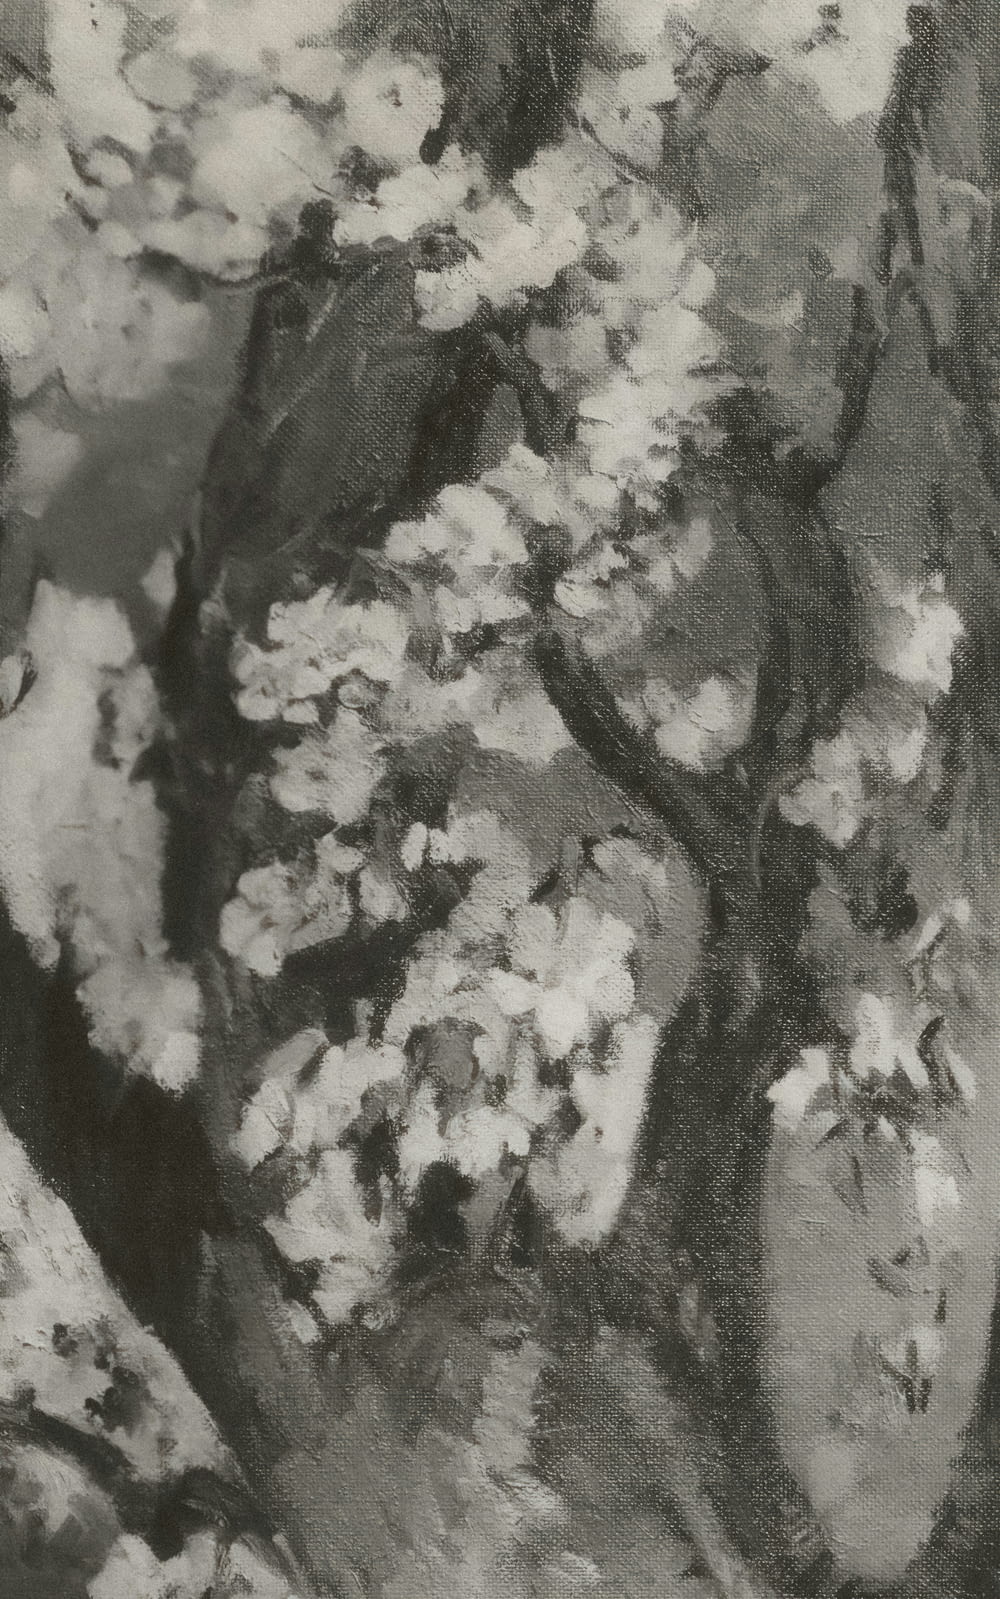 a black and white photo of a tree with white flowers